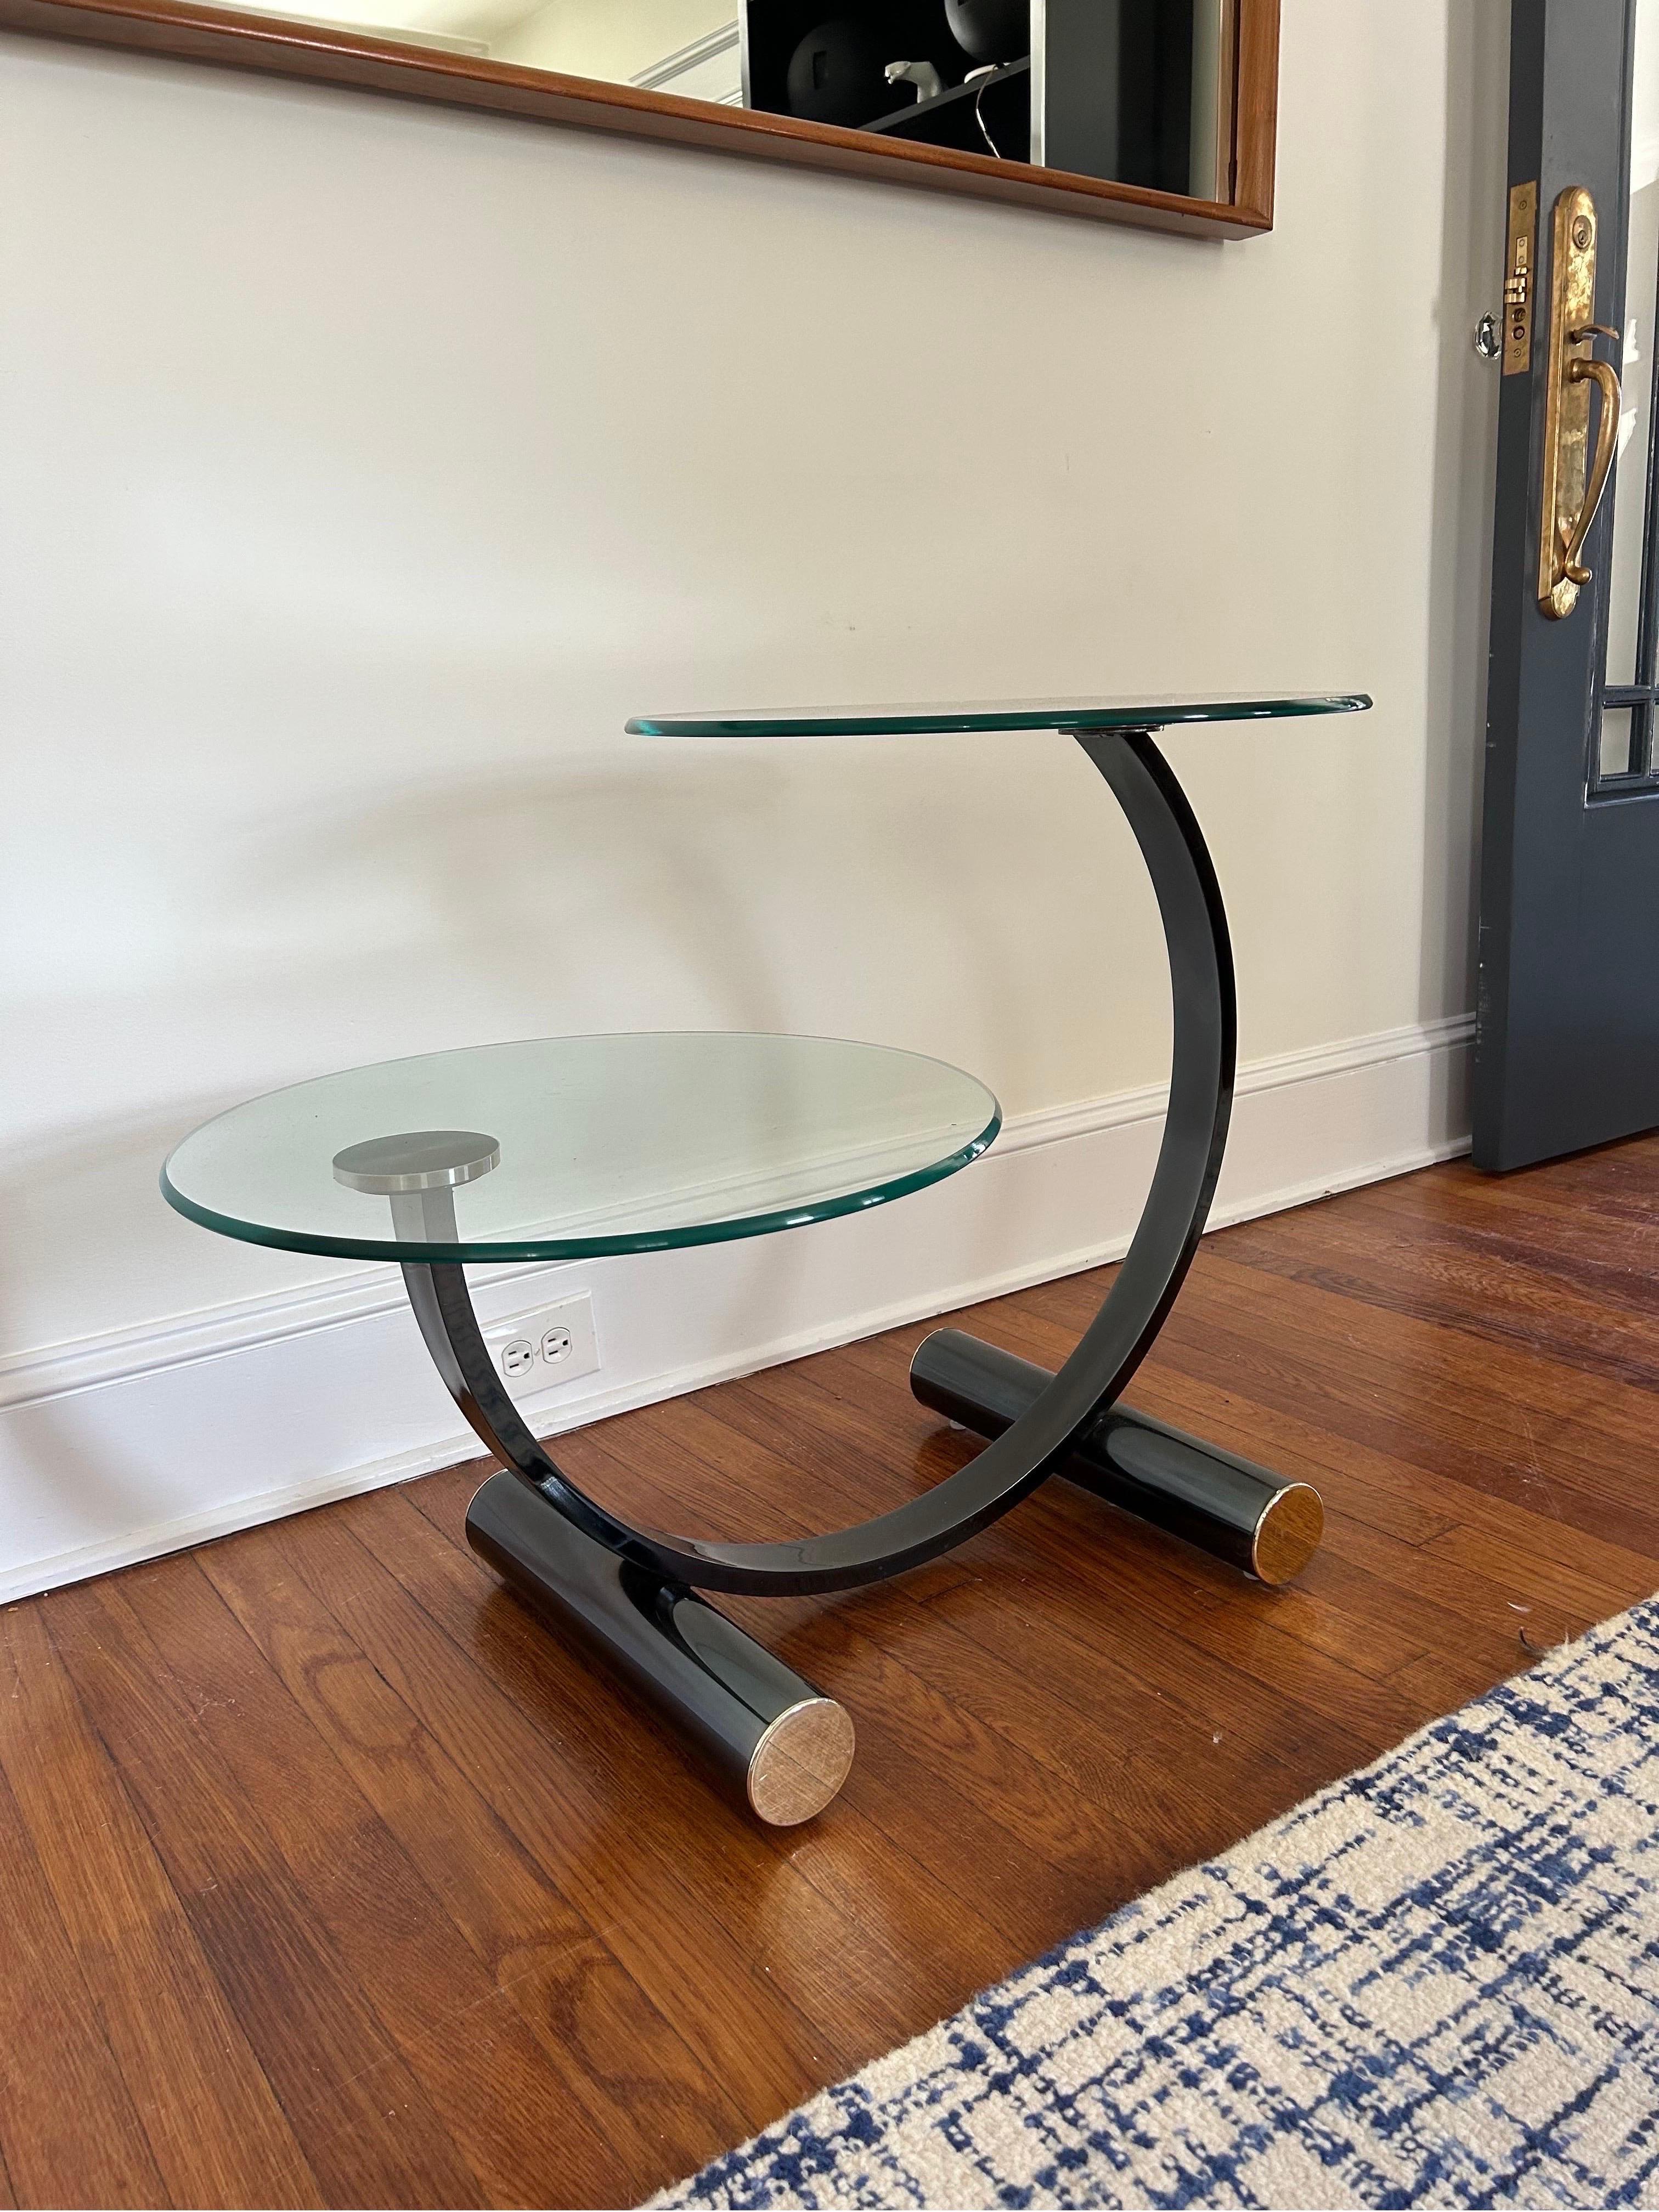 Great 2 Tiered side table in the manner of Donald Deskey. Steel tubular base with polished brass caps. 2 large circular glass surfaces suspended on arched frame.
Curbside to NYC/Philly $350 